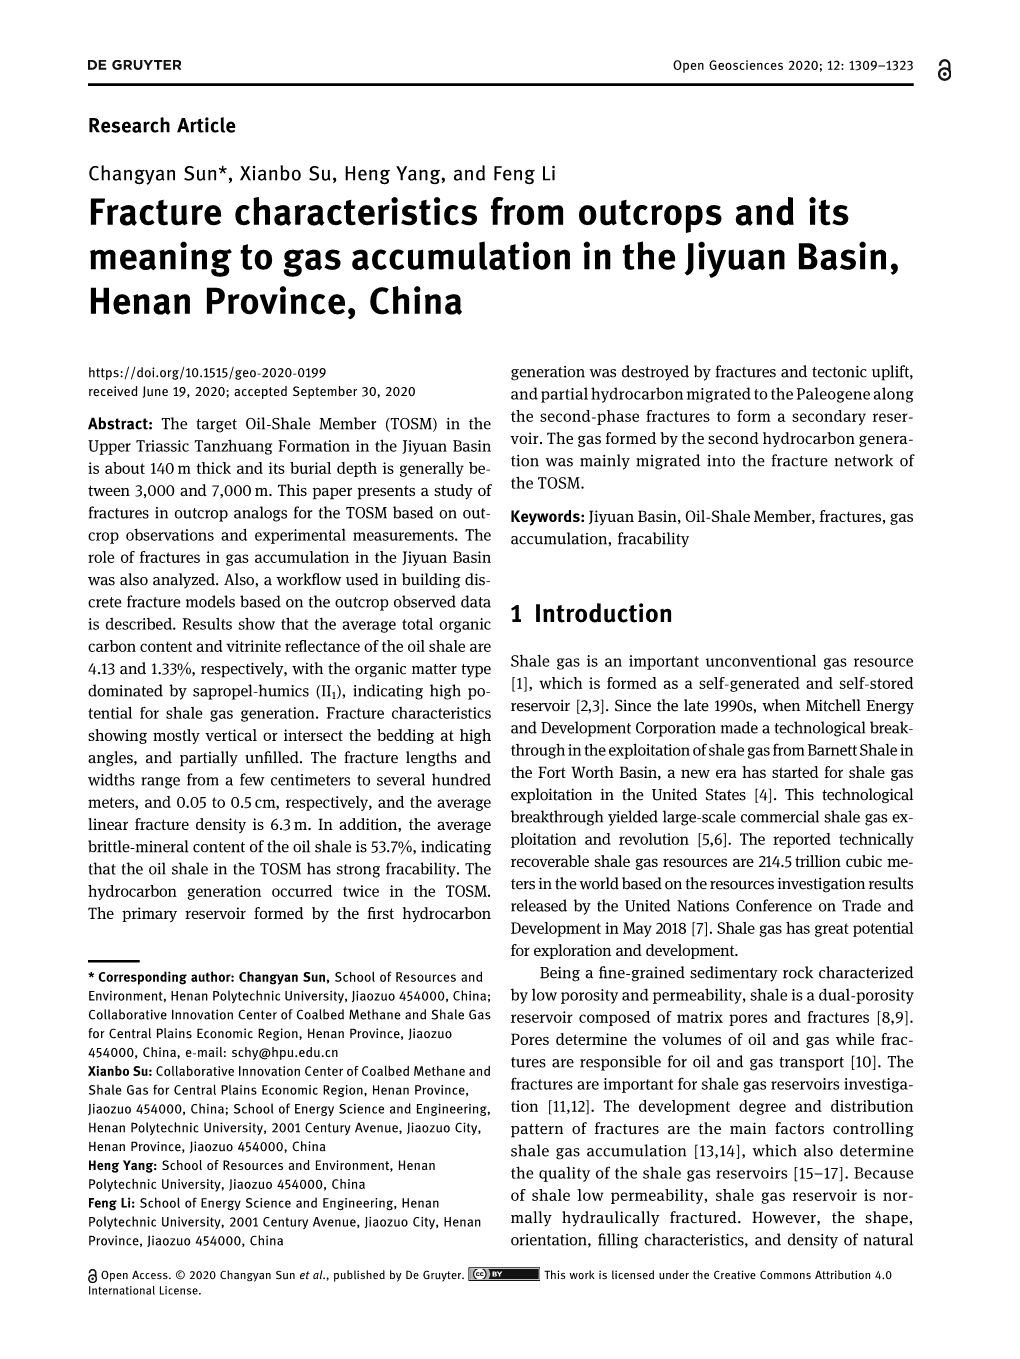 Fracture Characteristics from Outcrops and Its Meaning to Gas Accumulation in the Jiyuan Basin, Henan Province, China